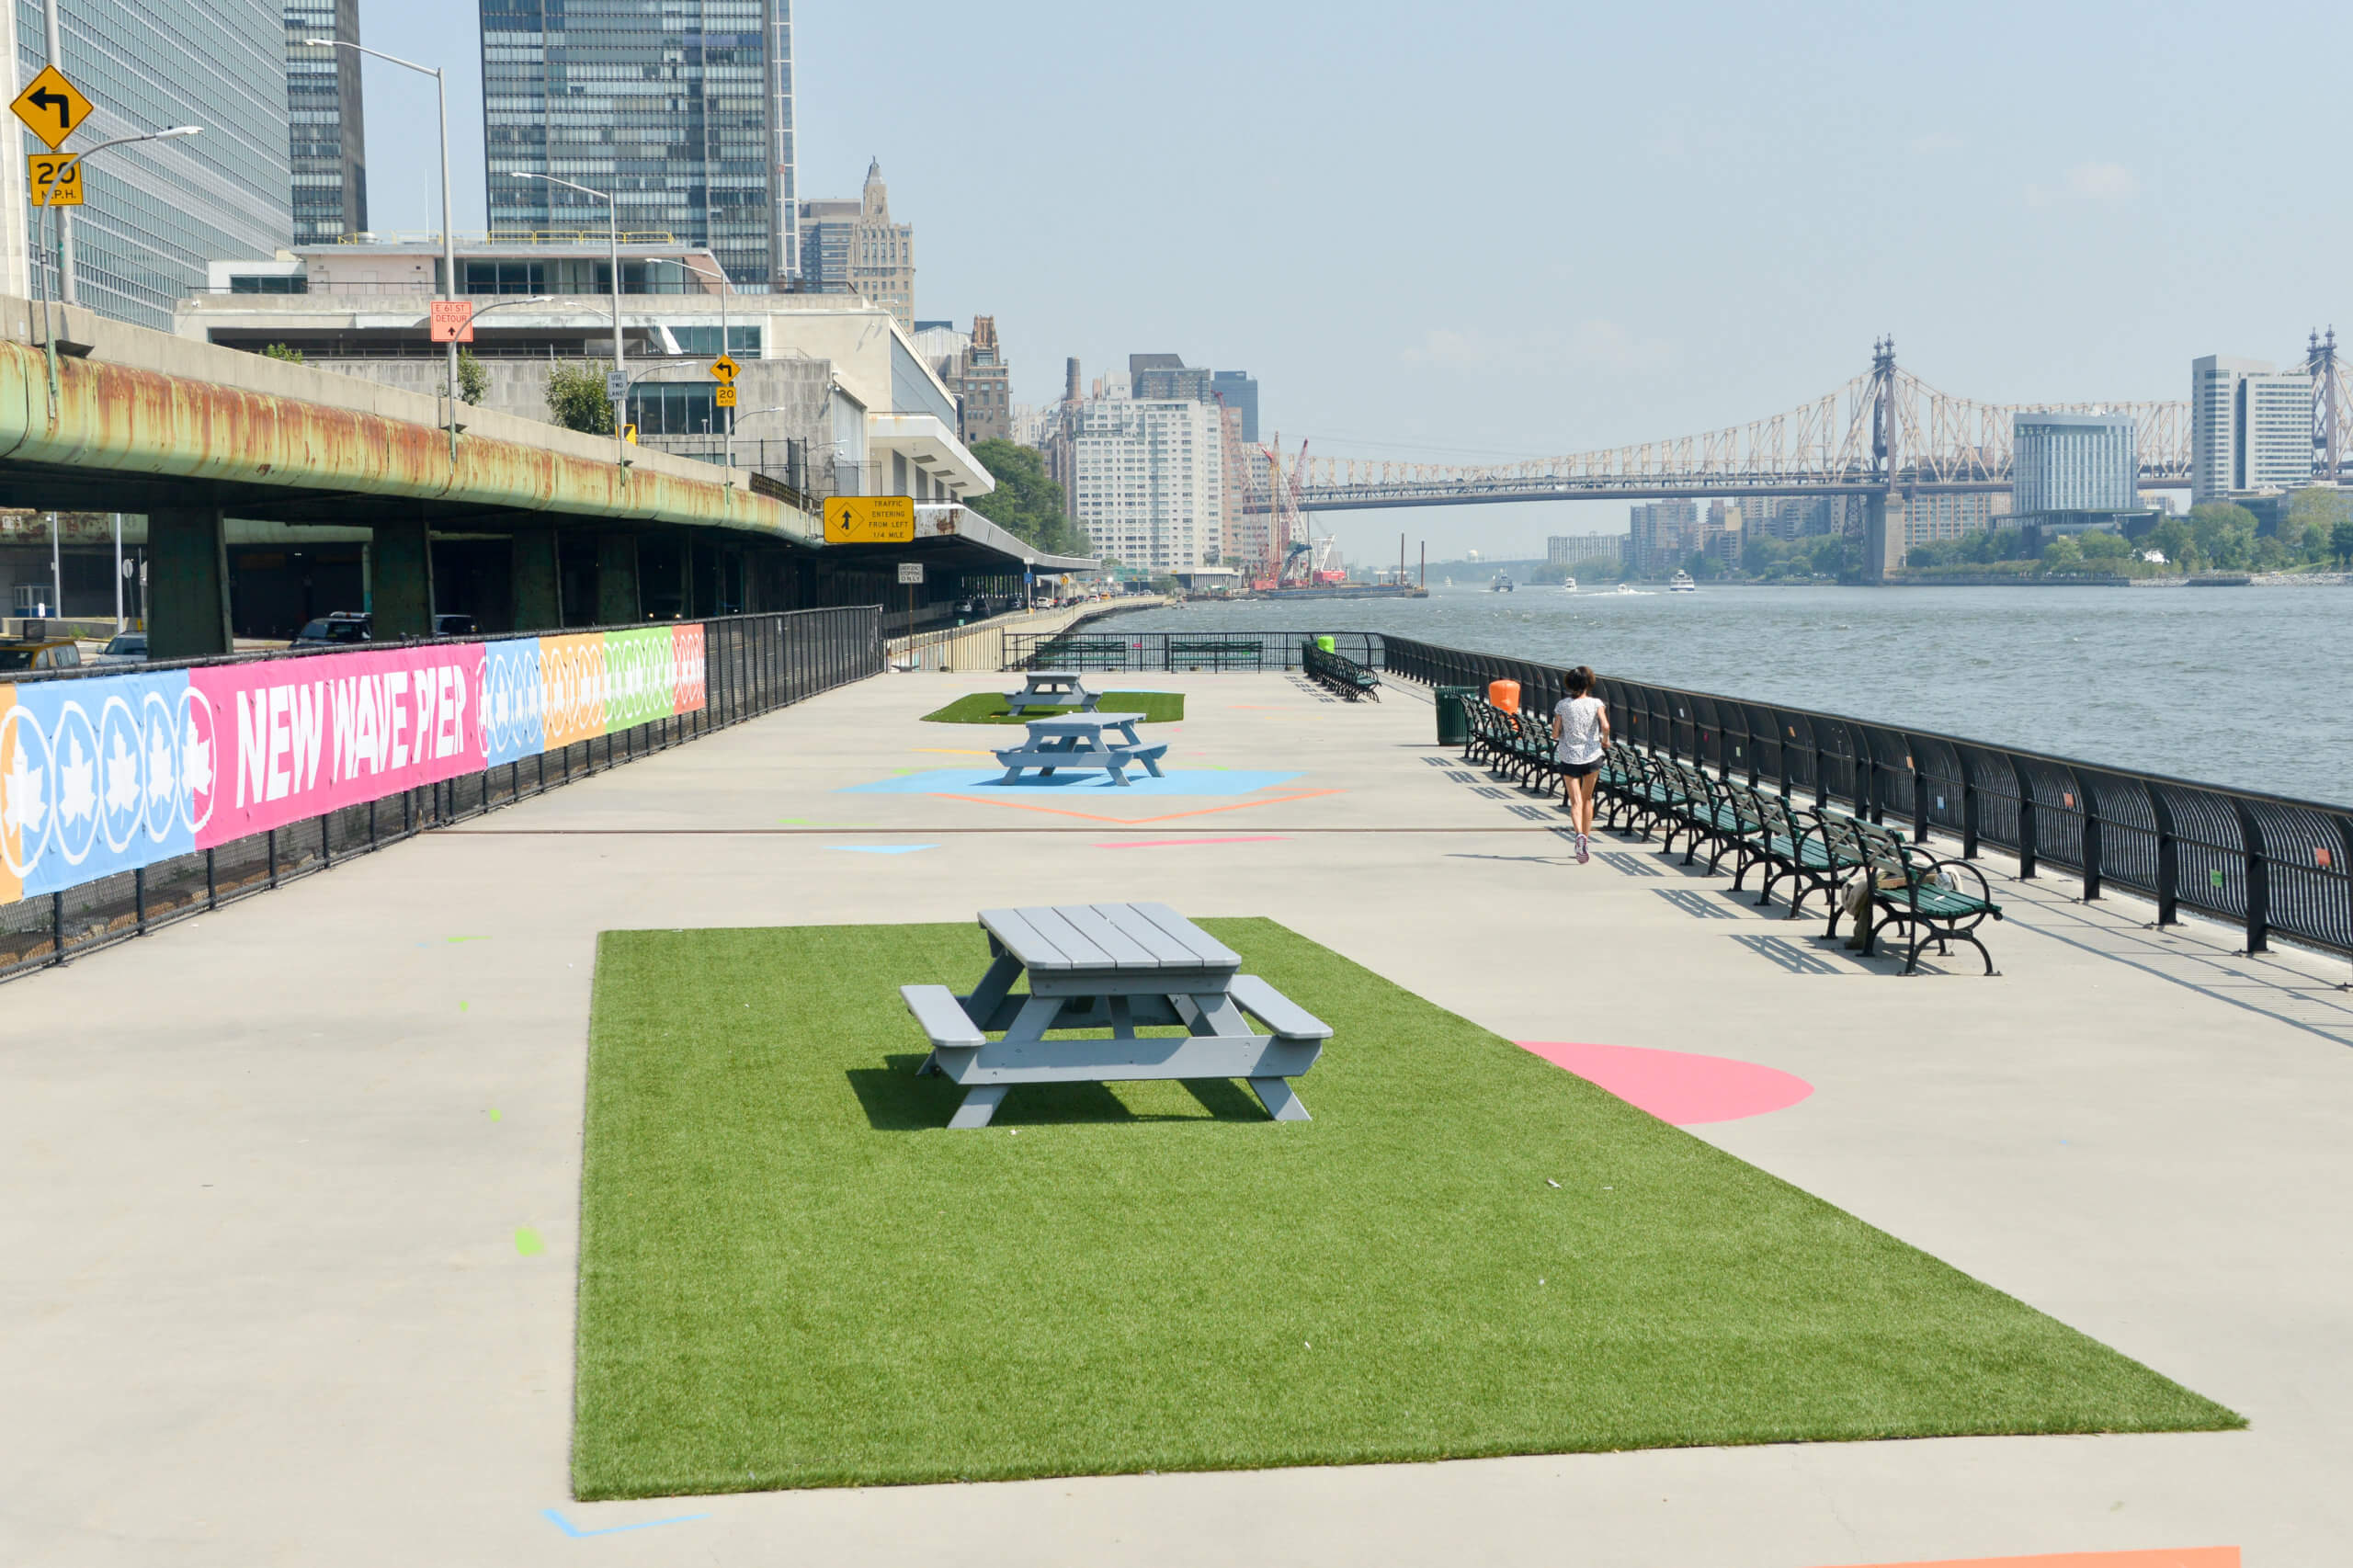 What's old is new again': NYC Parks celebrates the redesign of